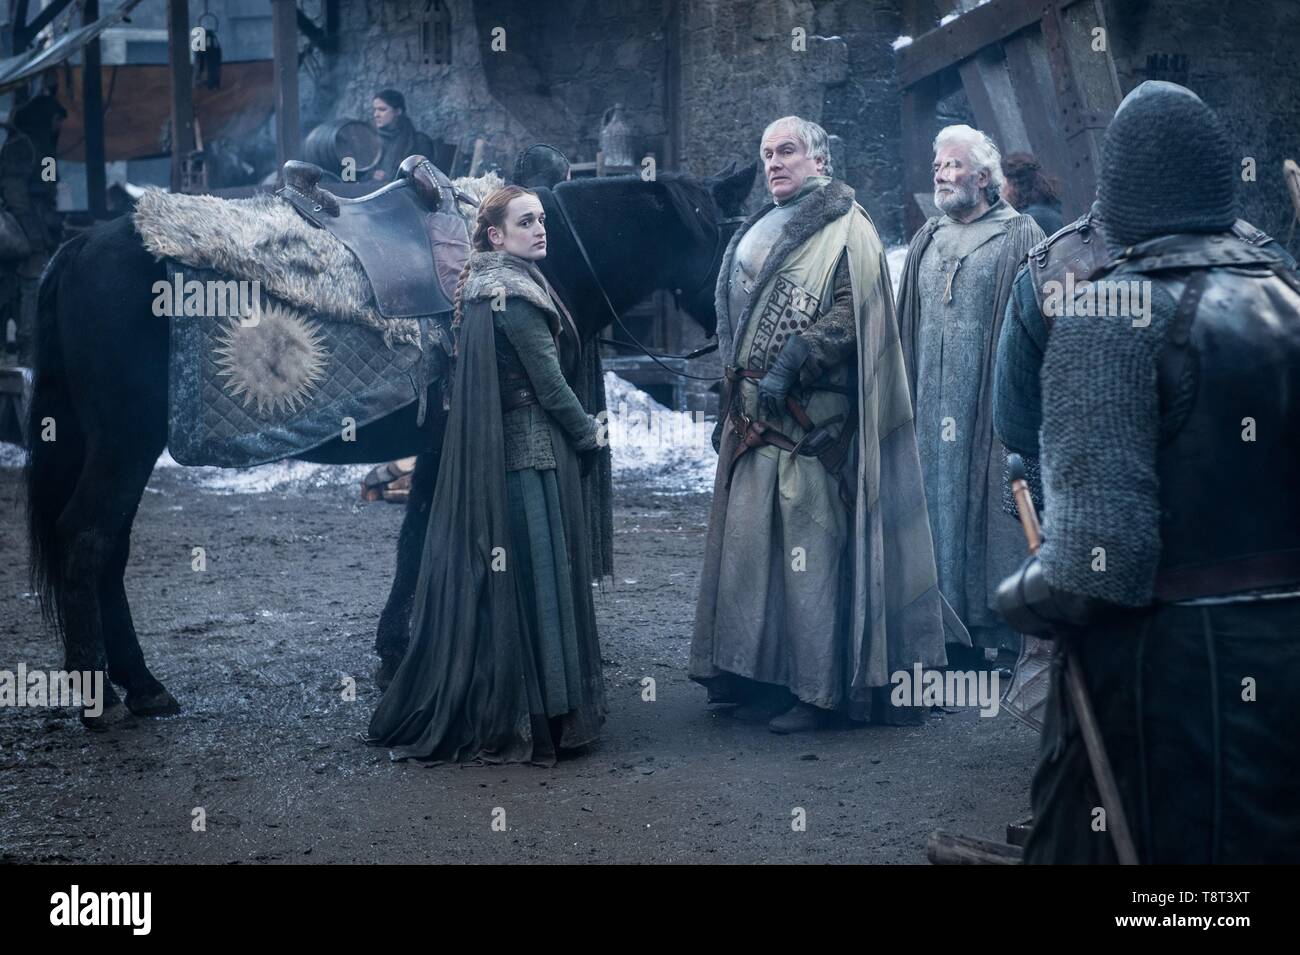 USA. A scene from ©HBO TV series: Game of Thrones - season 8 (2019)  A final season of the cult HBO tv show. Starts April 2019. Ref: LMK106-4798-230419 Supplied by LMKMEDIA. Editorial Only. Landmark Media is not the copyright owner of these Film or TV stills but provides a service only for recognised Media outlets. pictures@lmkmedia.com Stock Photo